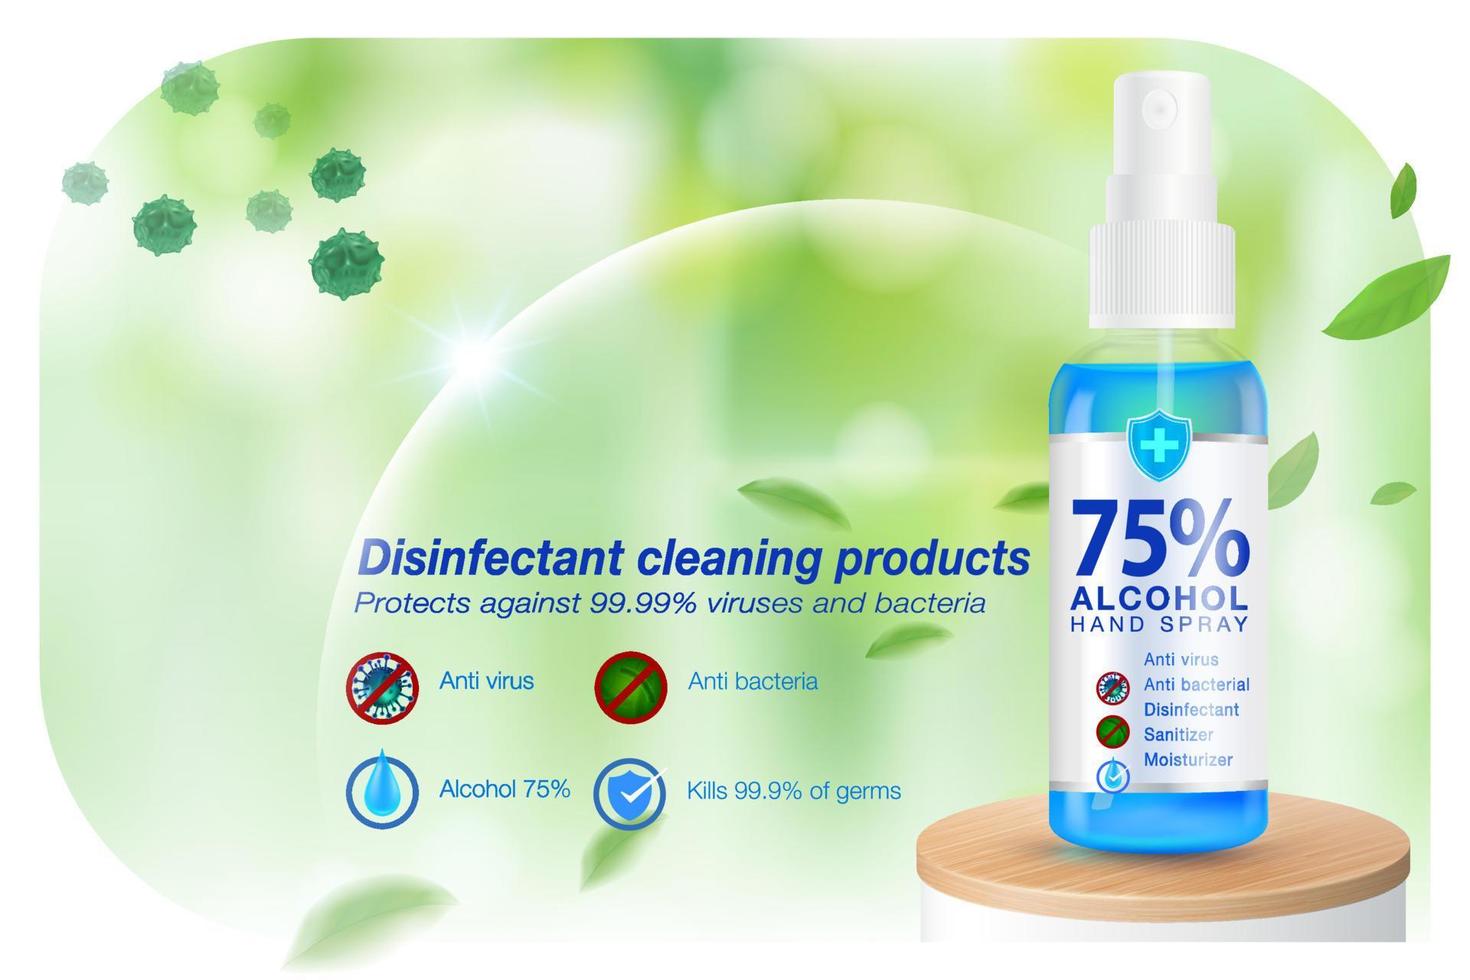 Ads Disinfectant cleaning products hand sanitizer spray alcohol components, kill up to  covid viruses, bacteria and germs on a blurred light green background. vector